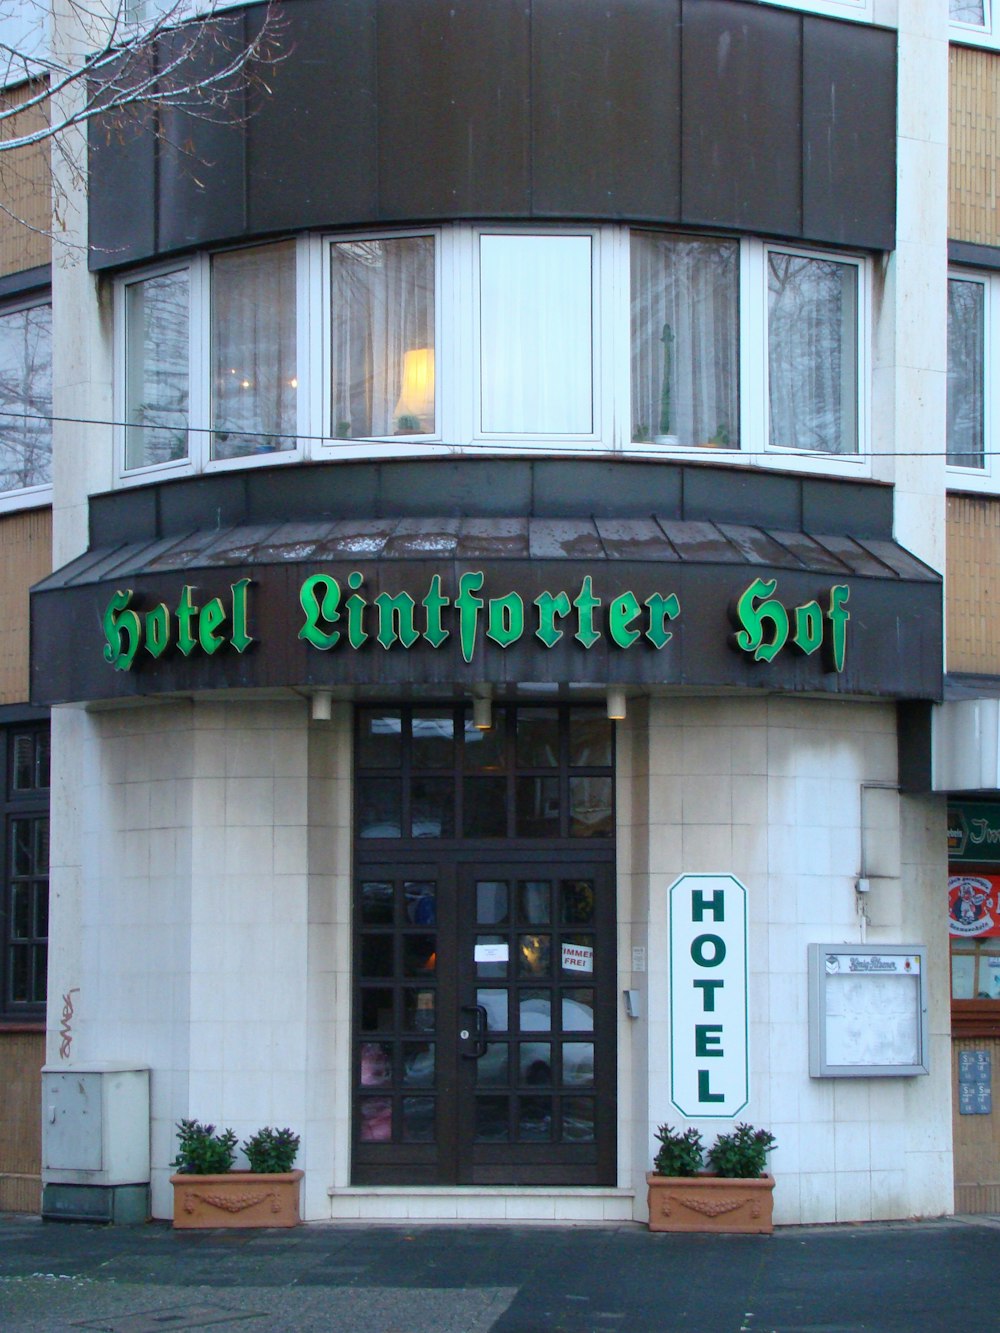 a building with green lettering